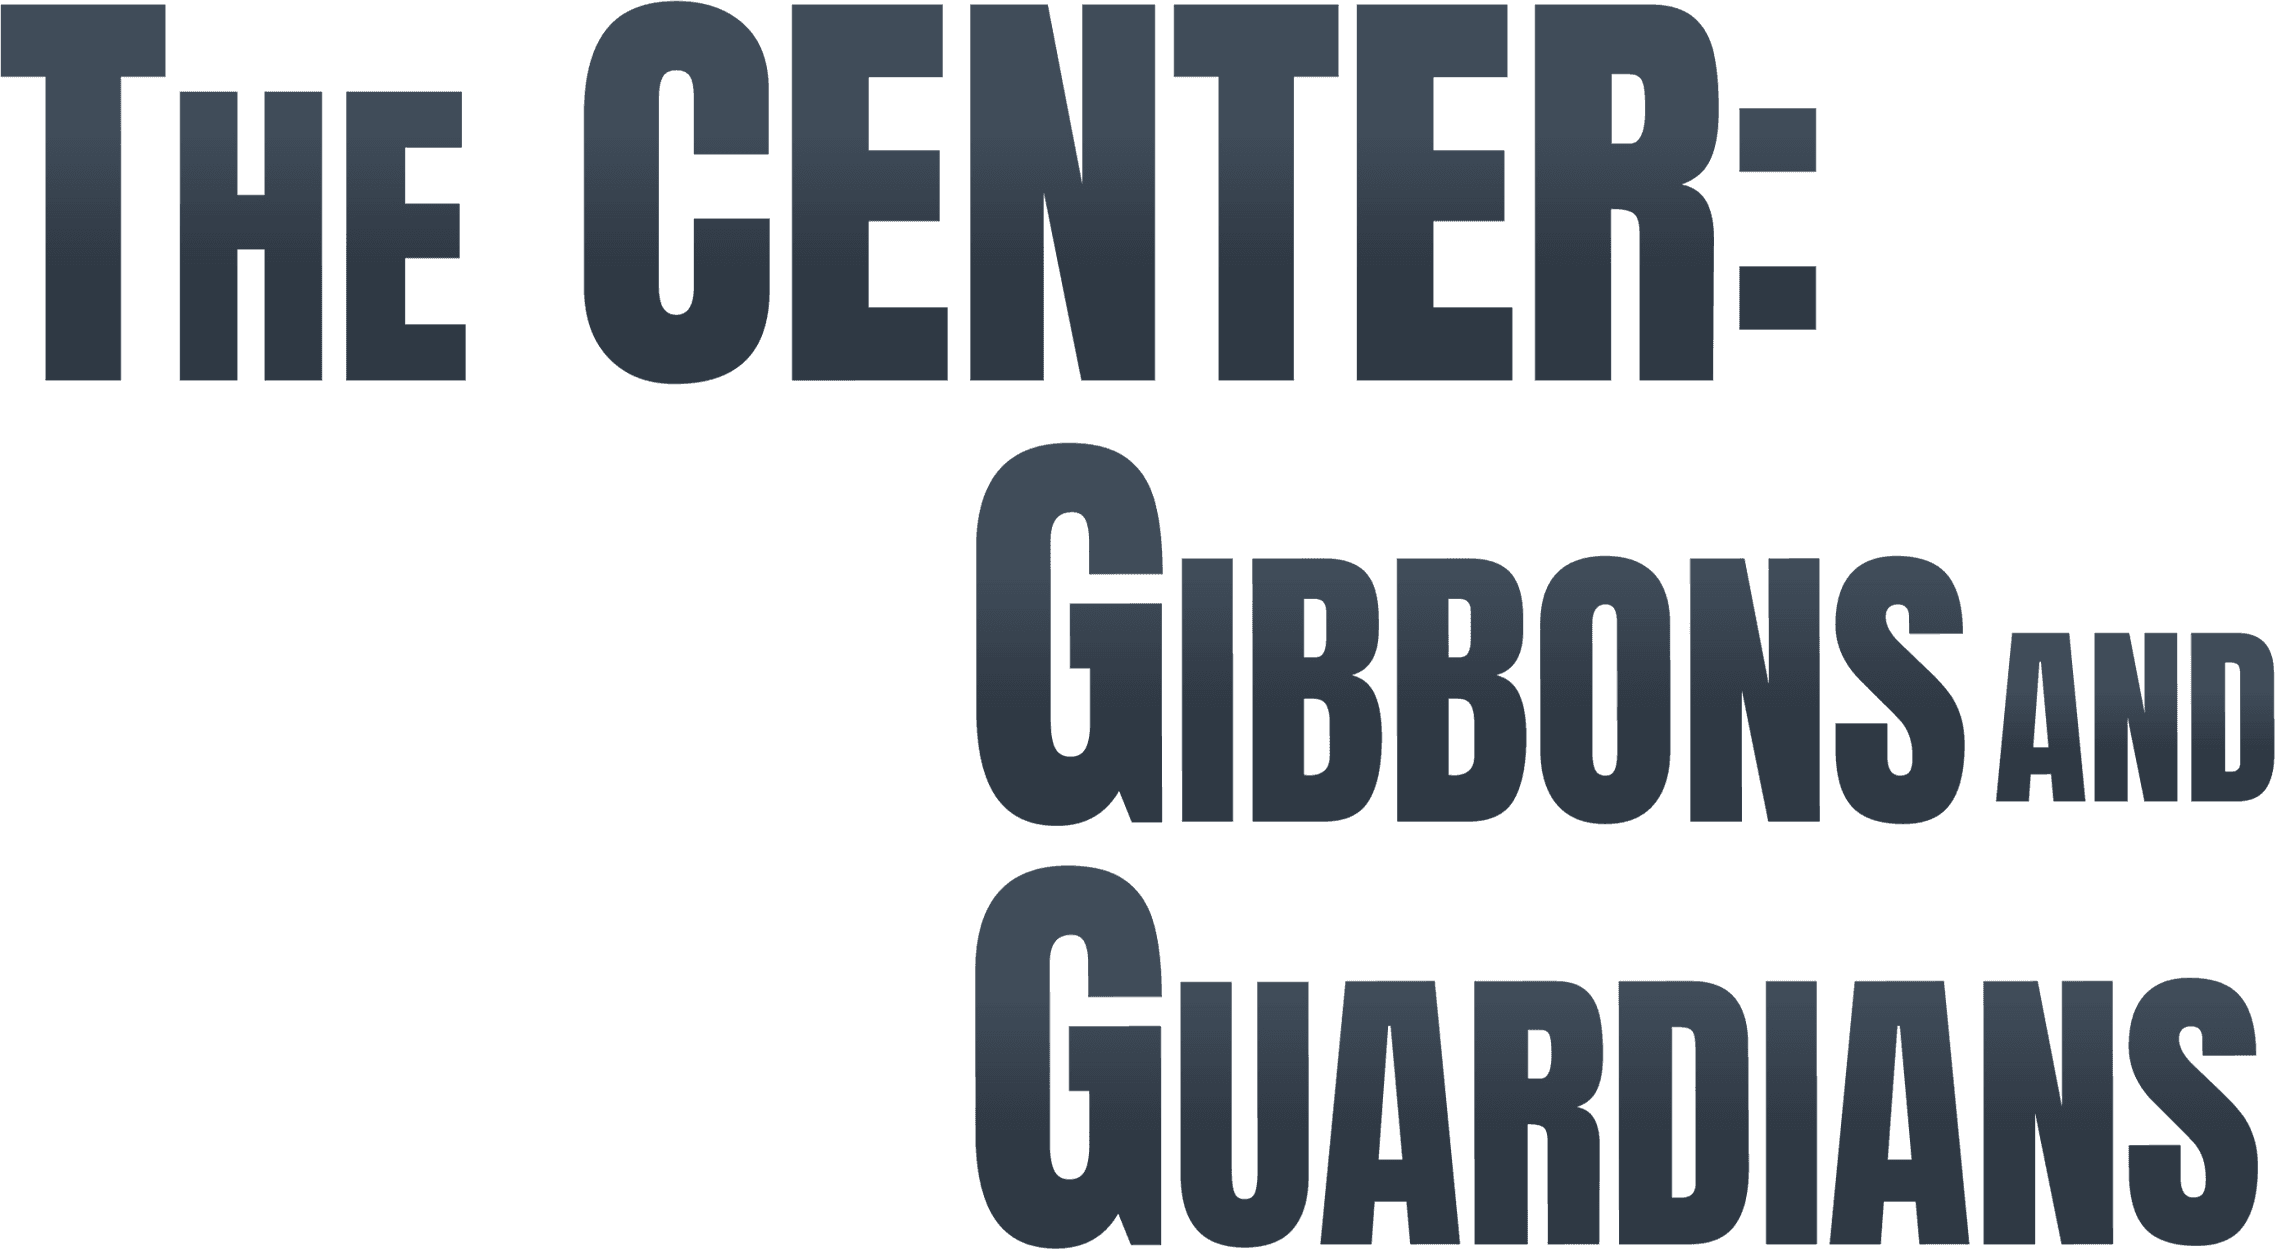 The Center: Gibbons and Guardians logo